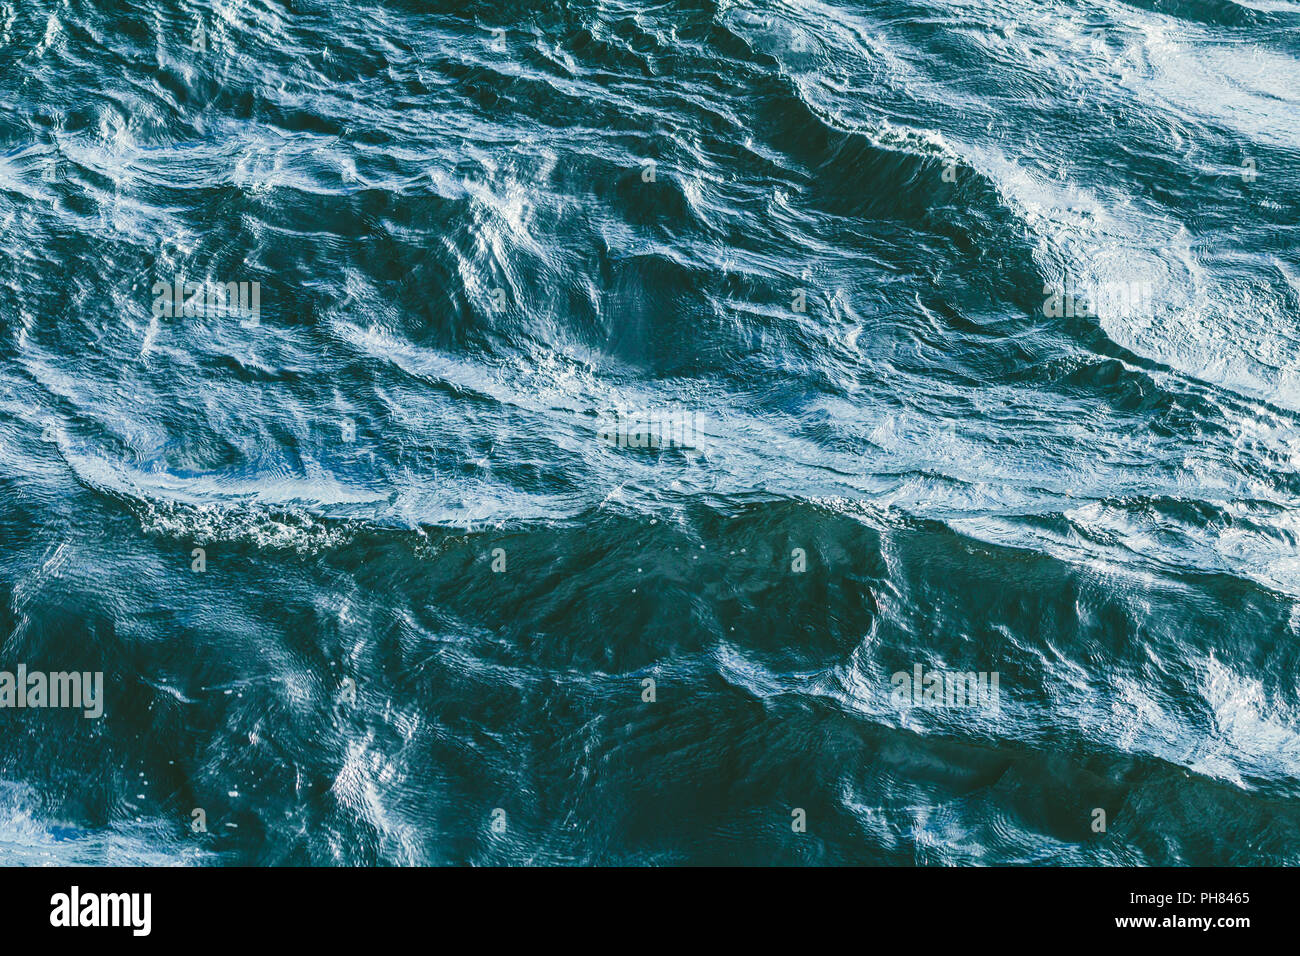 Top view of stormy sea. Blue water backround. Stock Photo